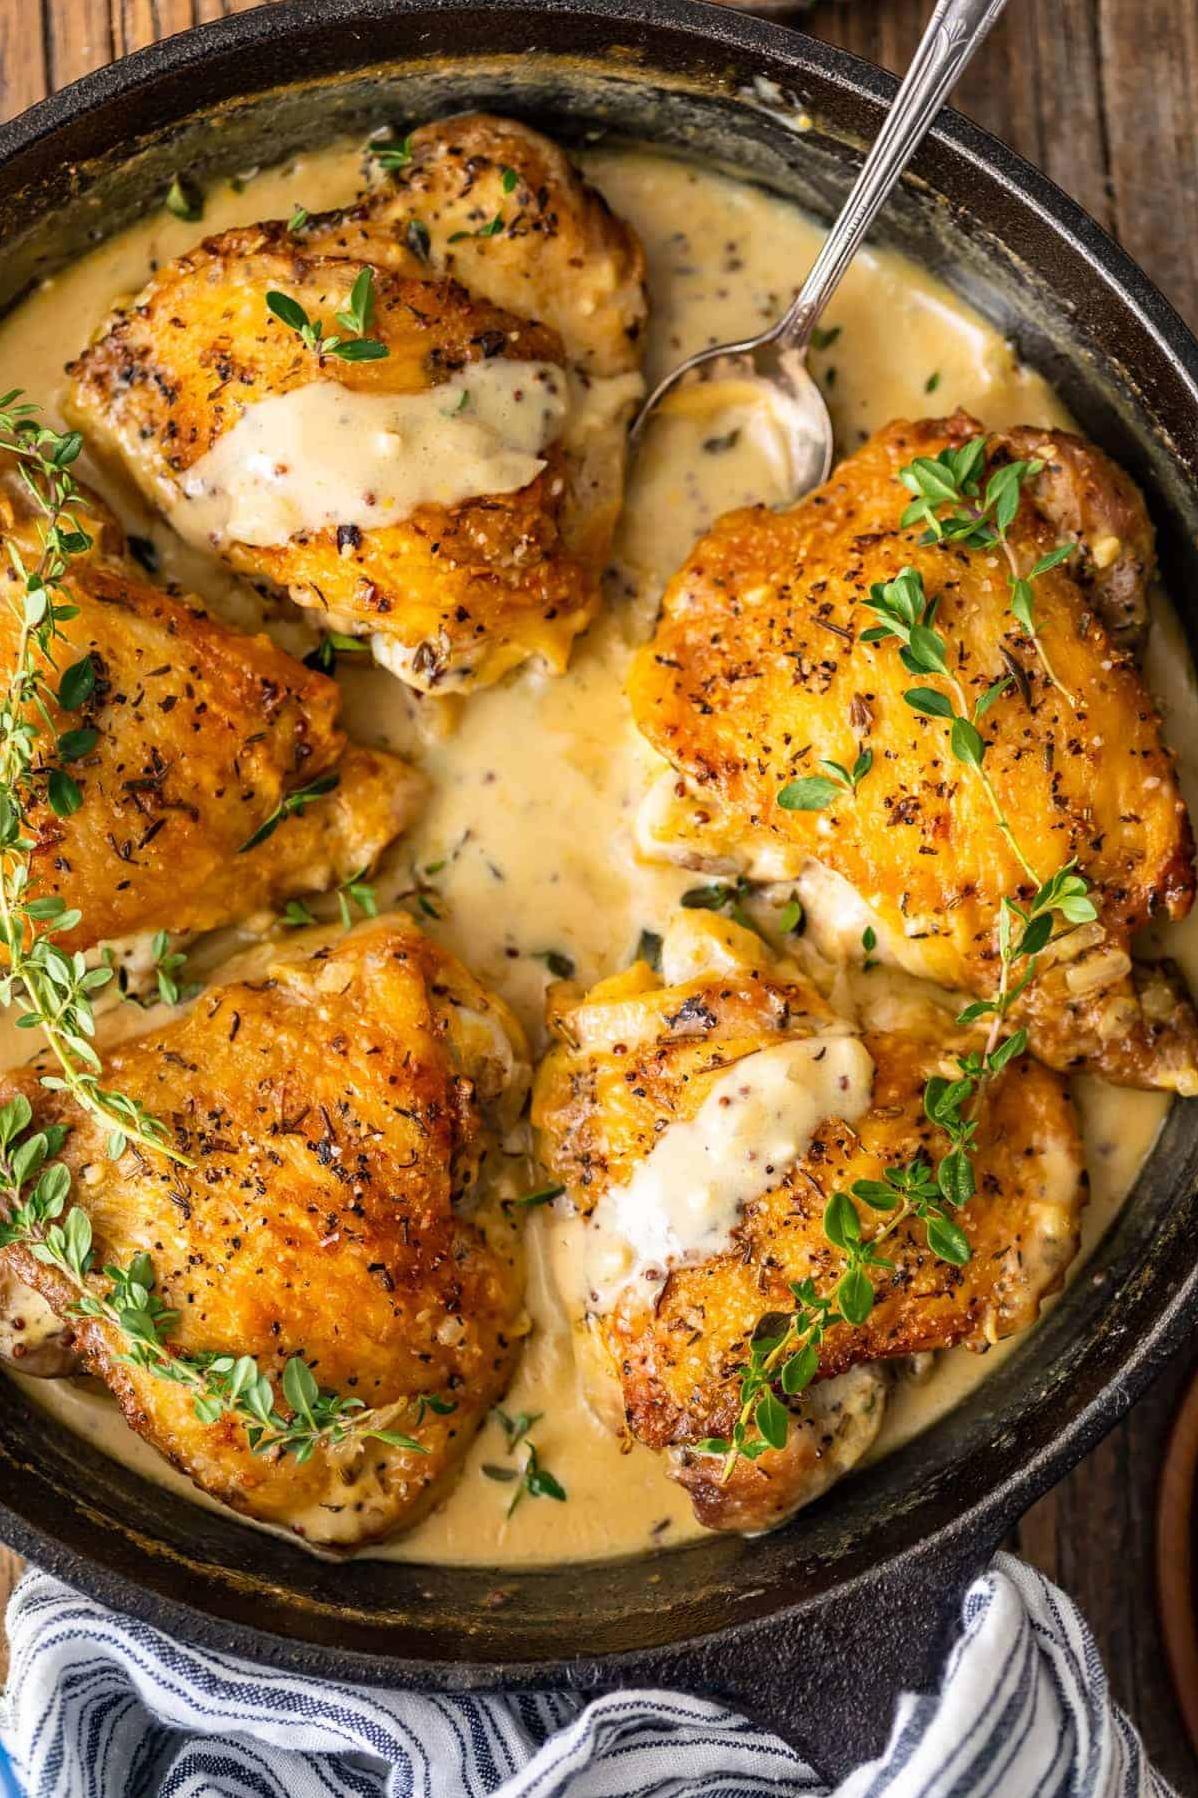  This easy chicken in white wine is perfect for a cozy night in